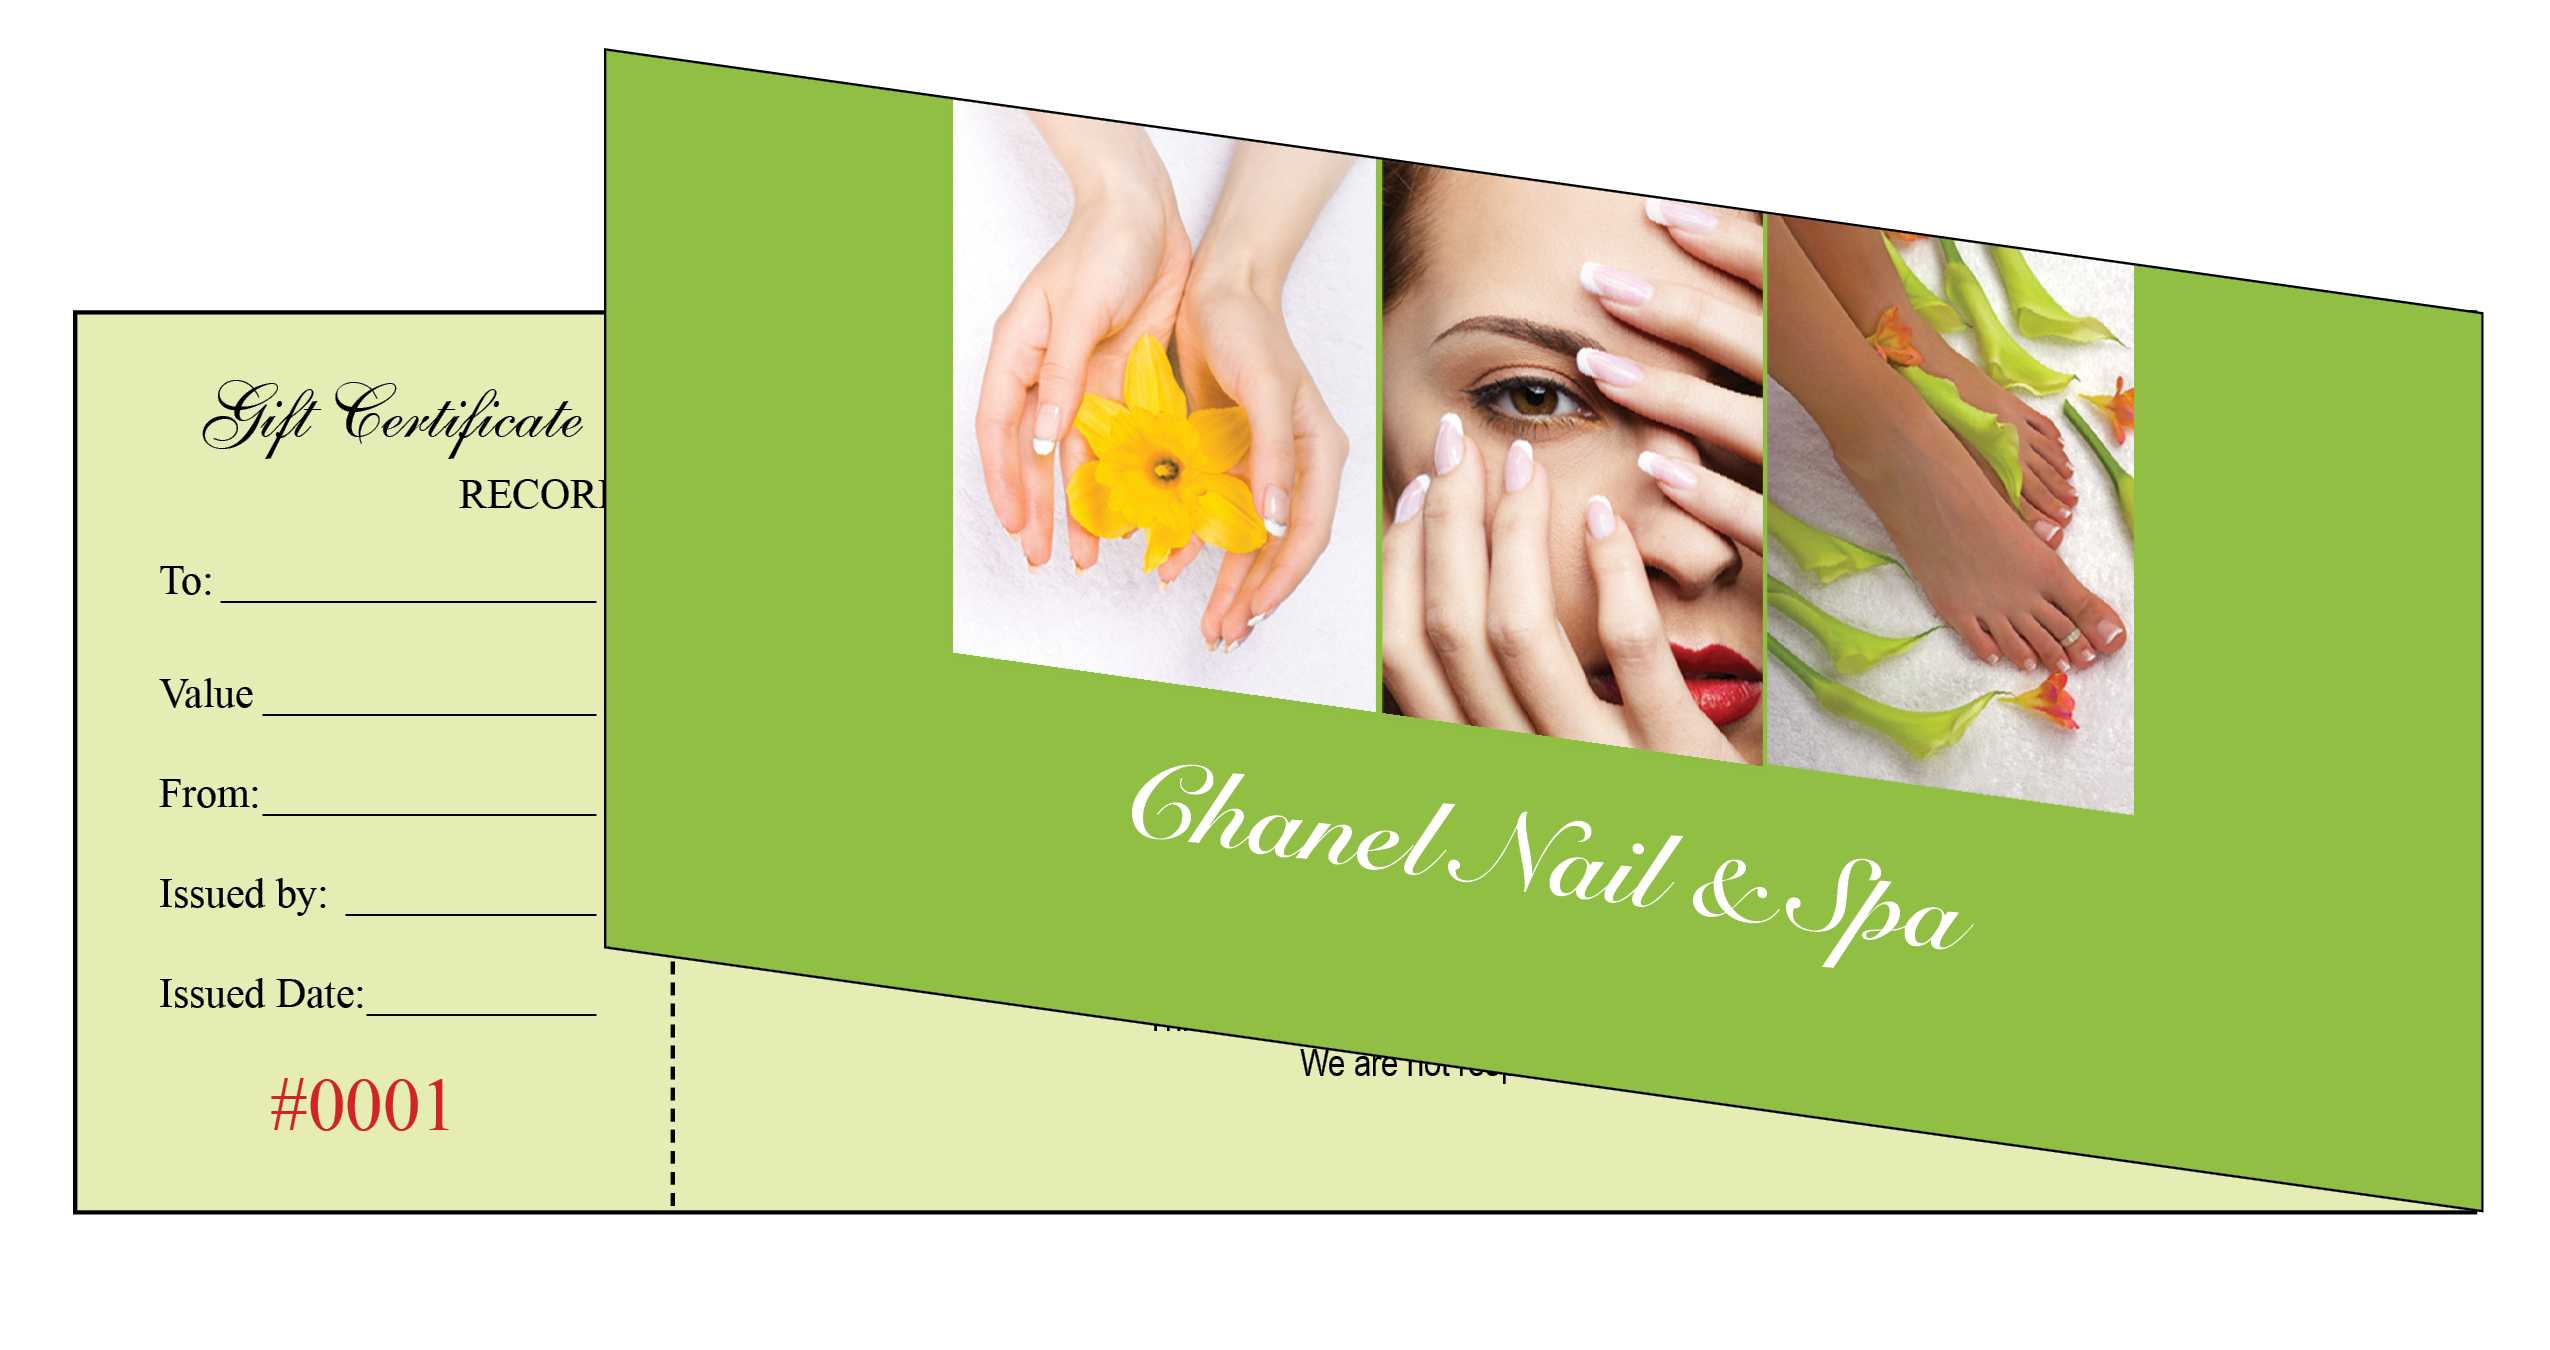 Gift Certificates Printing For Nail Salon Regarding Nail Gift Certificate Template Free